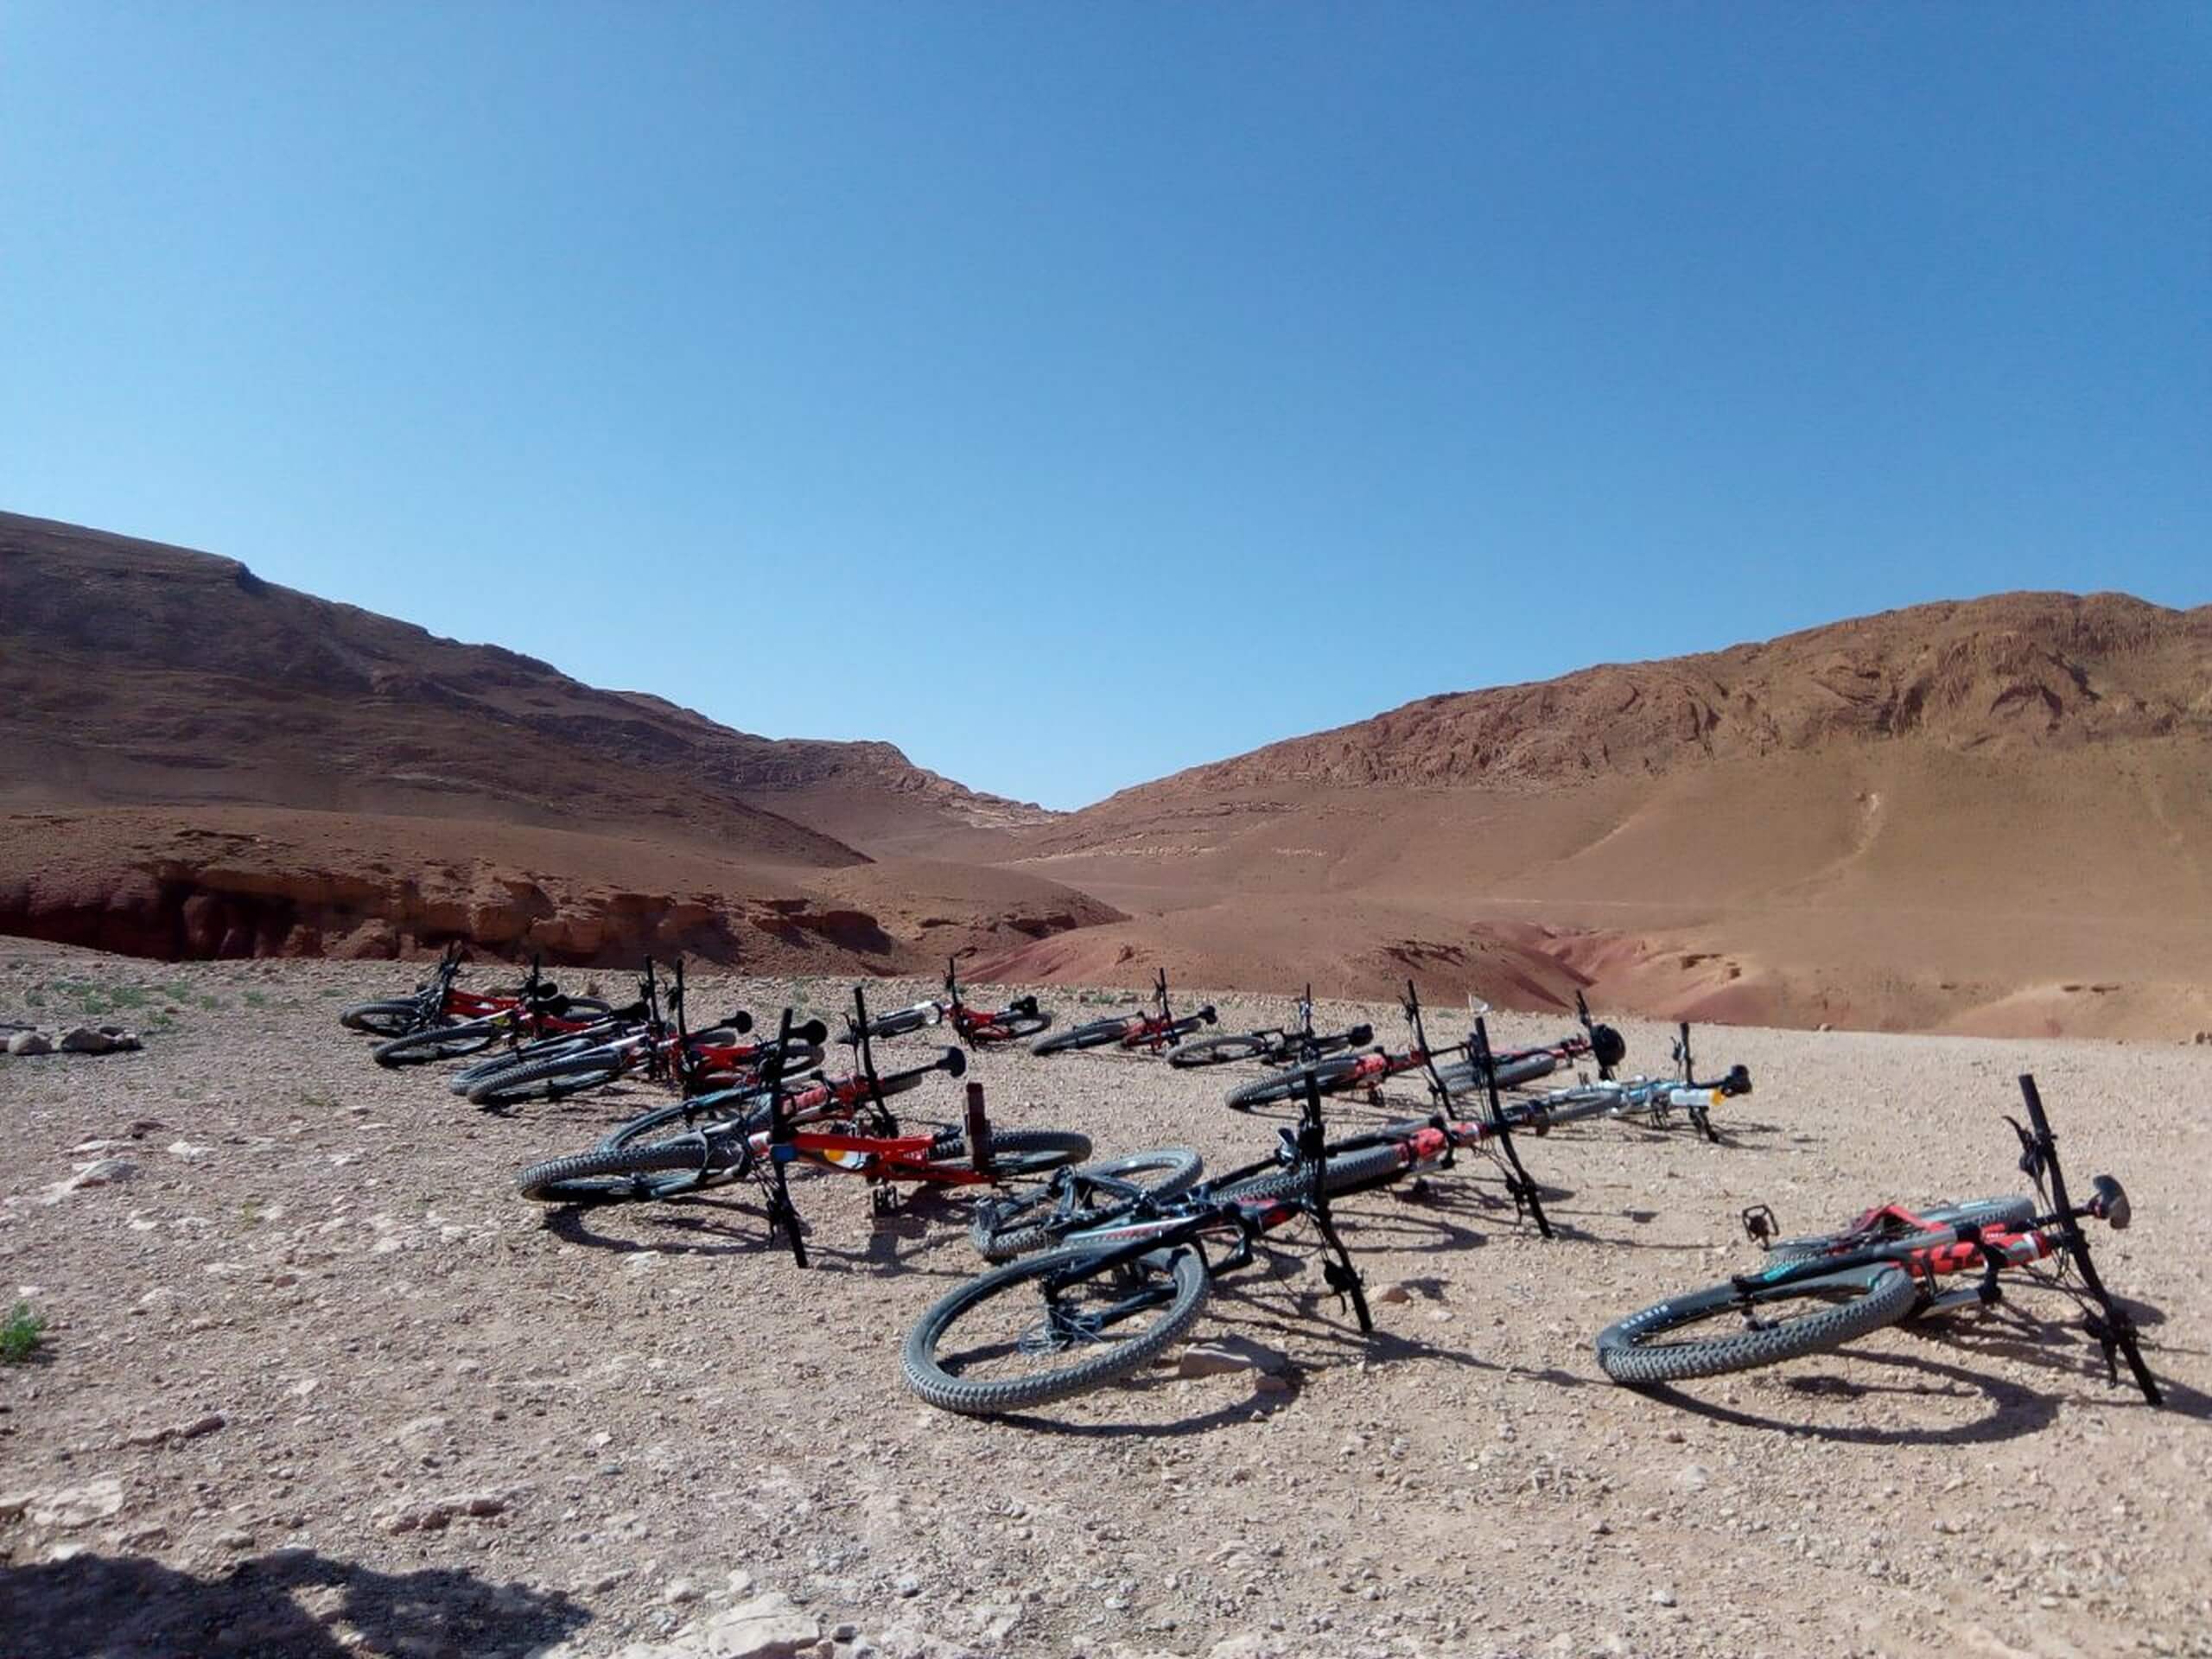 Mountain bikes laying on a gravel path in Morocco